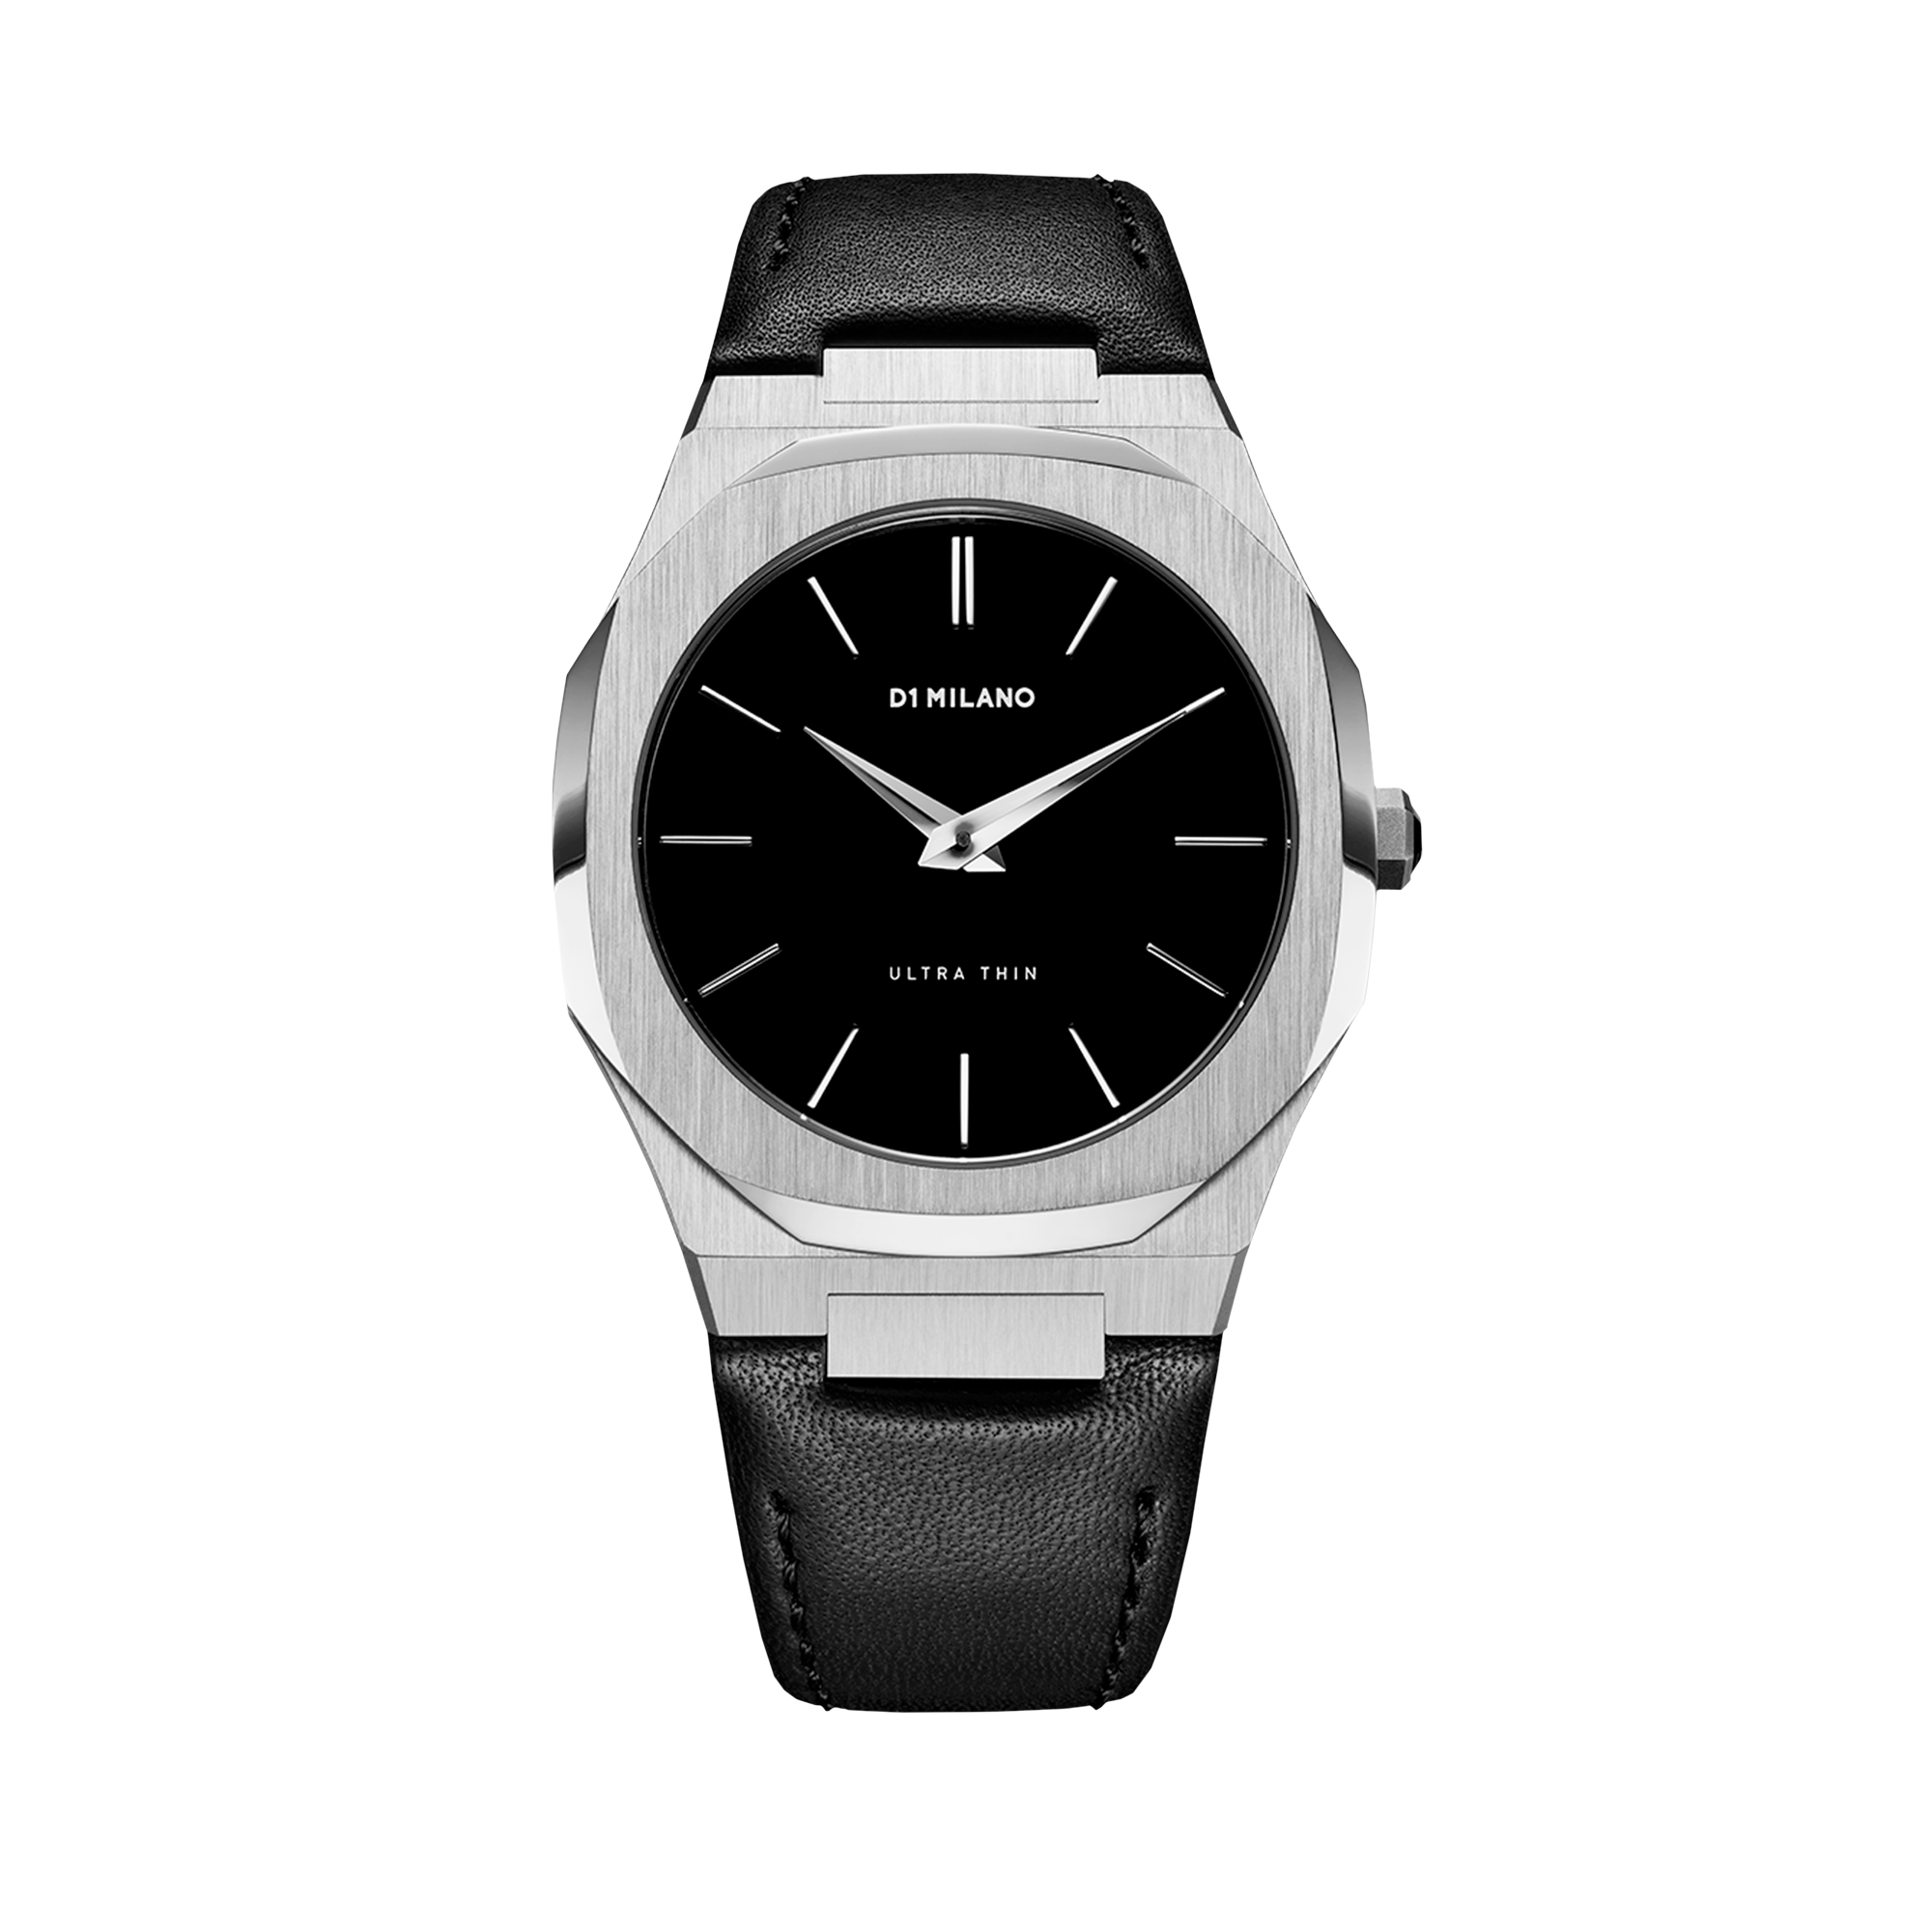 Ultra Thin Leather 40 mm - Silver | D1 Milano